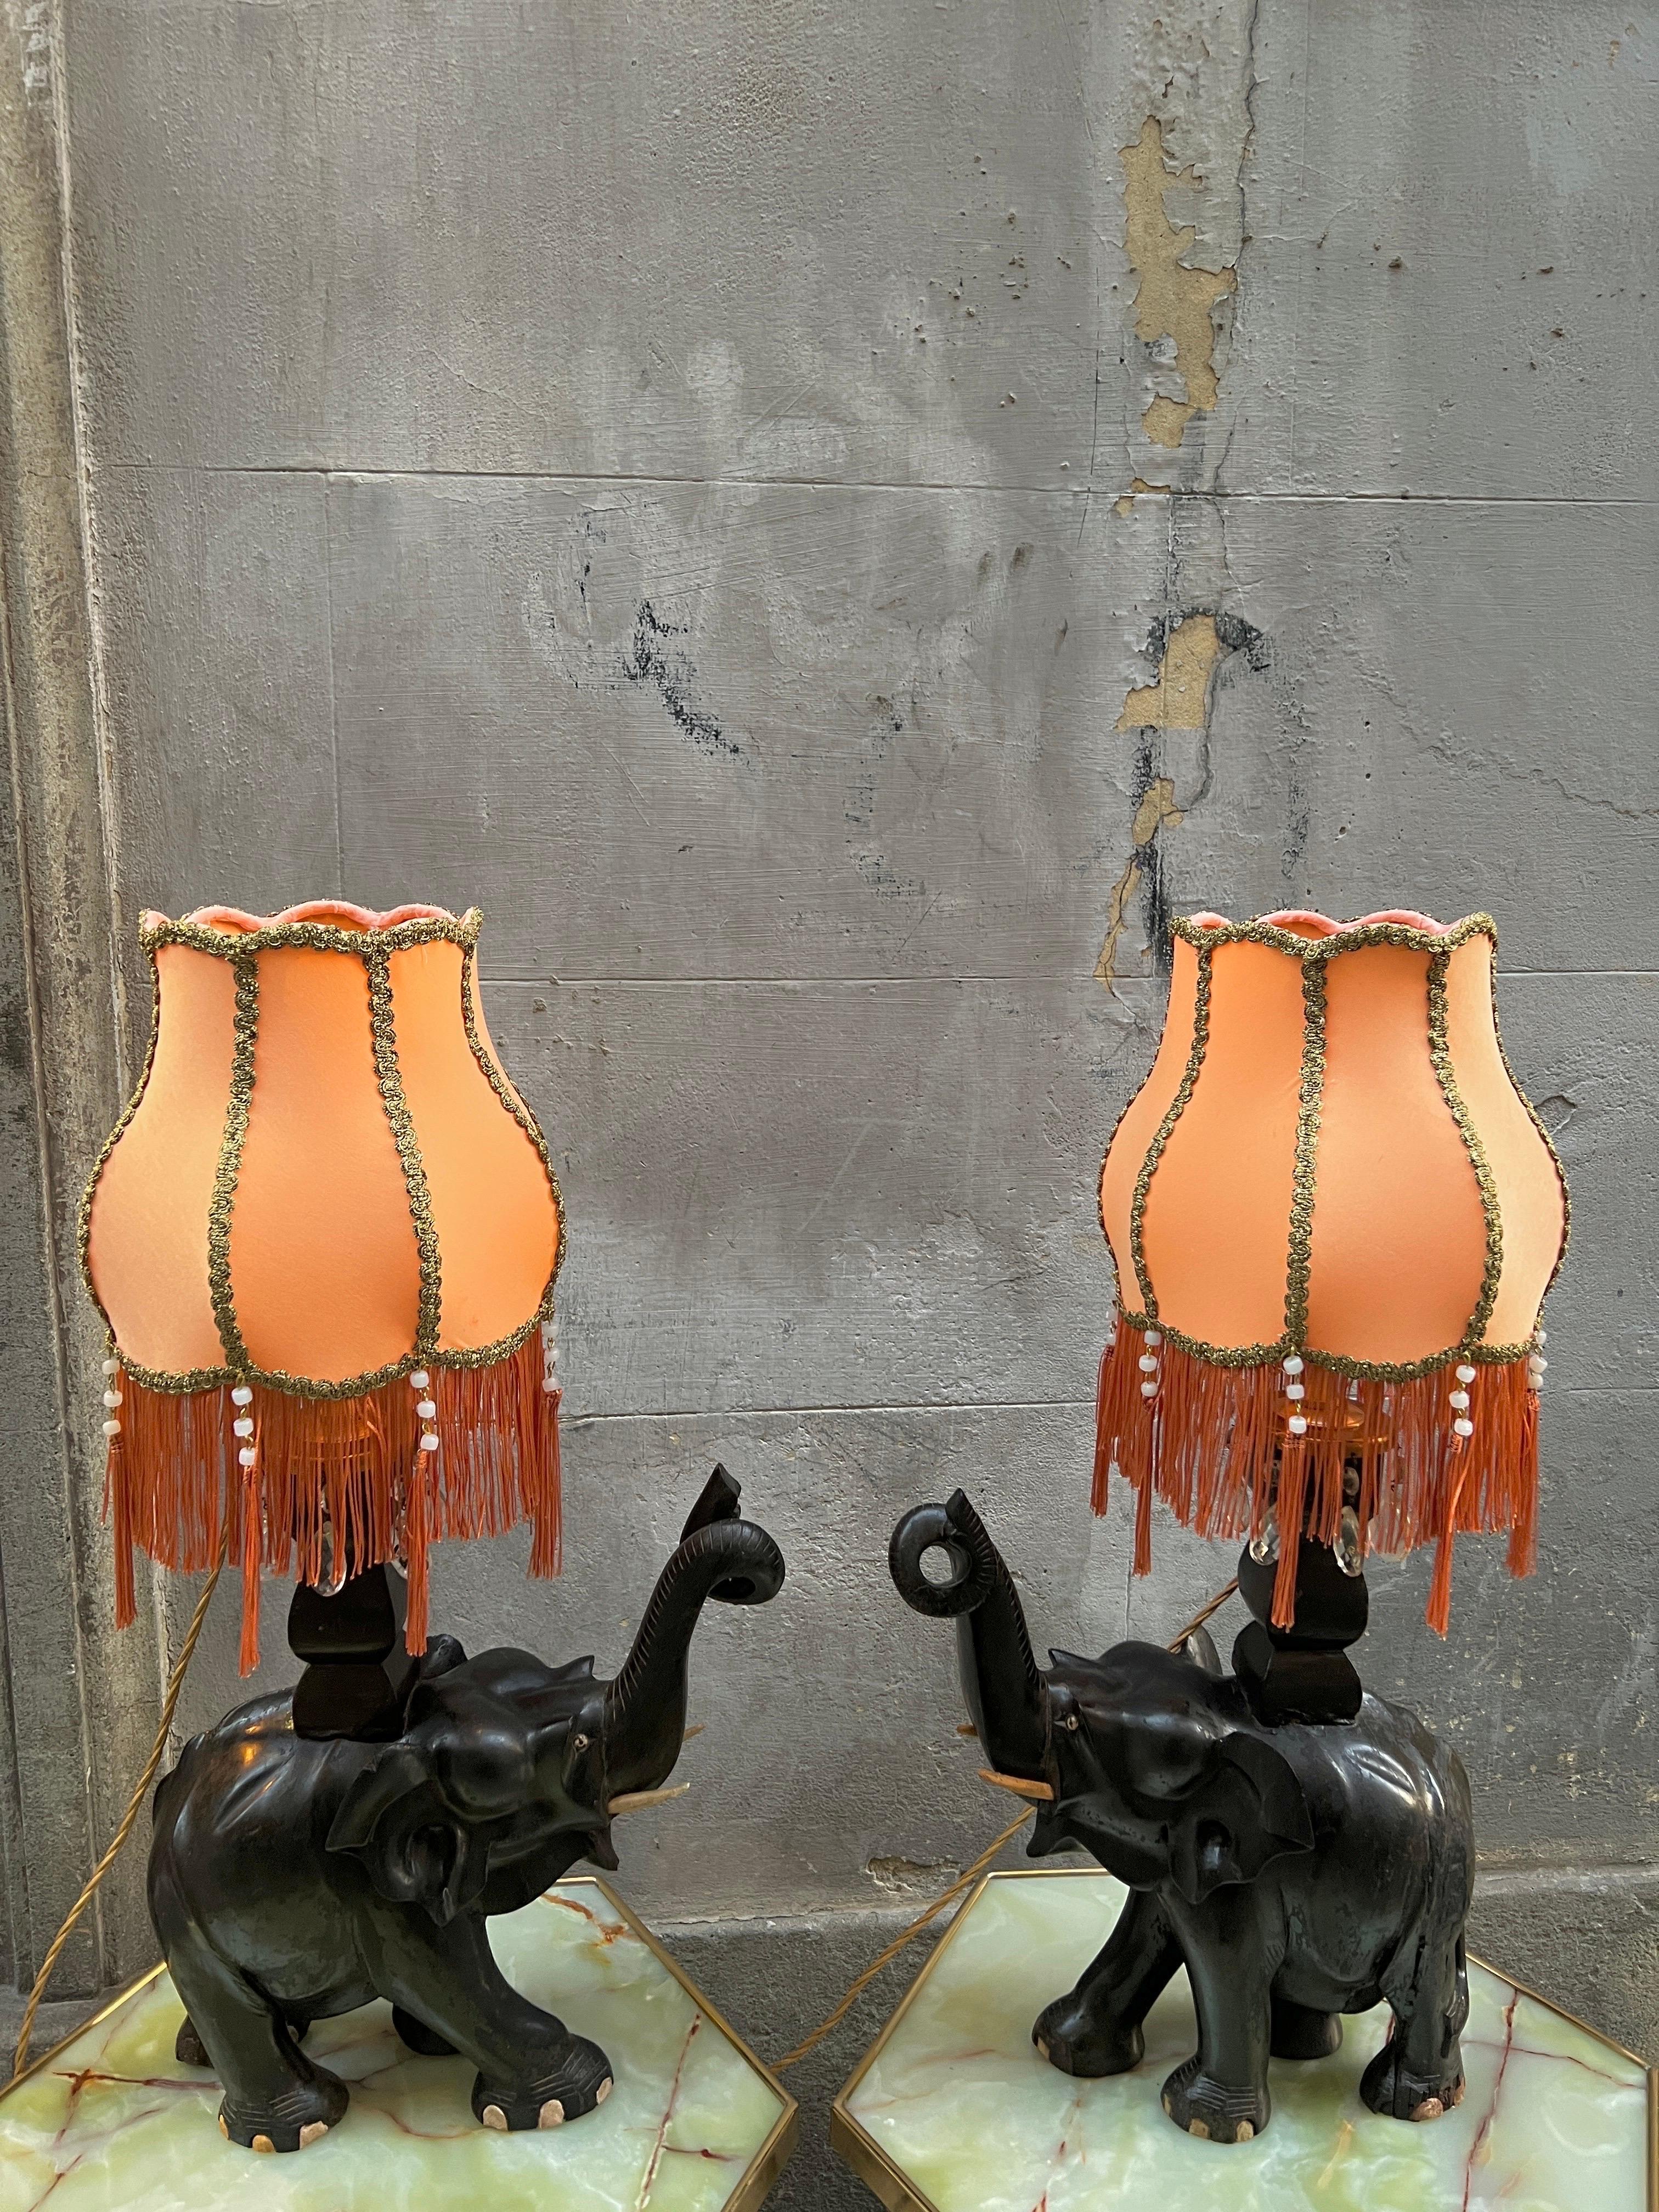 Pair of Ebony Elephants Table Lamps with our Handcrfted Orange Lampshades with fringes and bronze trimming borders.
The Black Ebony Wood Sculptures are inspired by the exotic colonial period of the Early 20th Century.
One light bulb each lamp.
